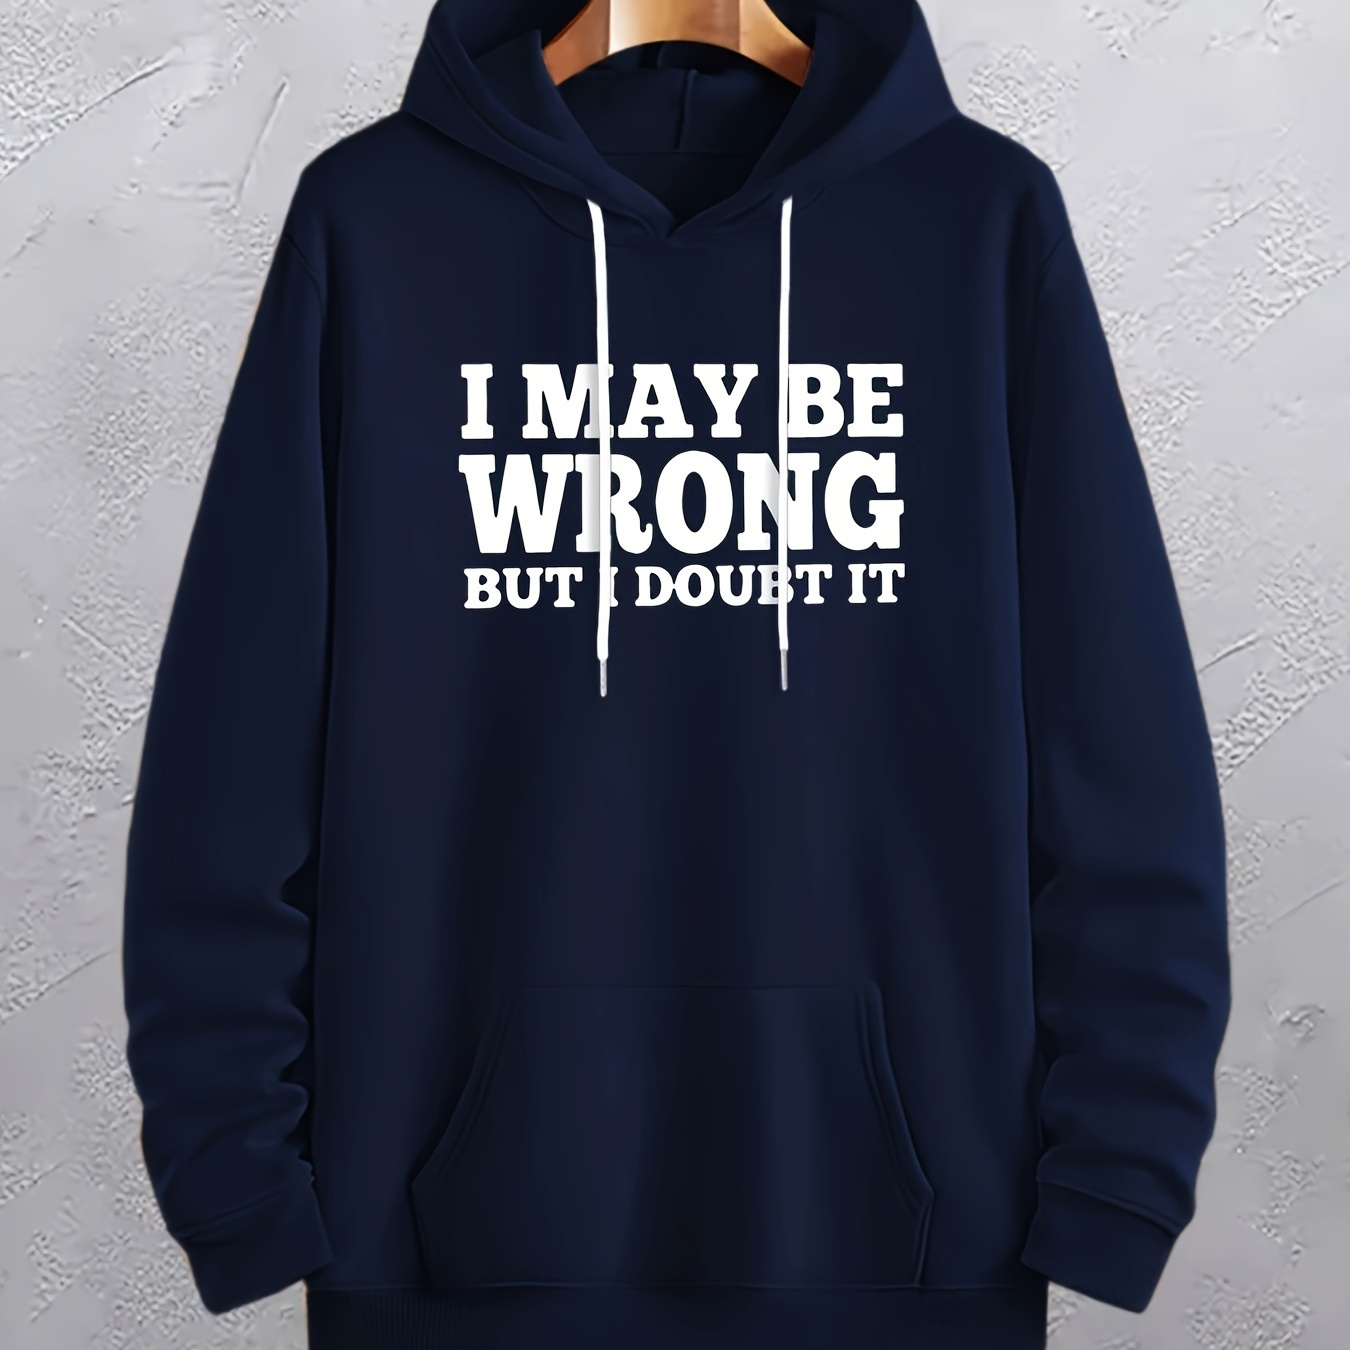 

Plus Size Men's "i May Be Wrong" Graphic Print Hooded Sweatshirt Fashion Casual Hoodies For Fall Winter, Men's Clothing